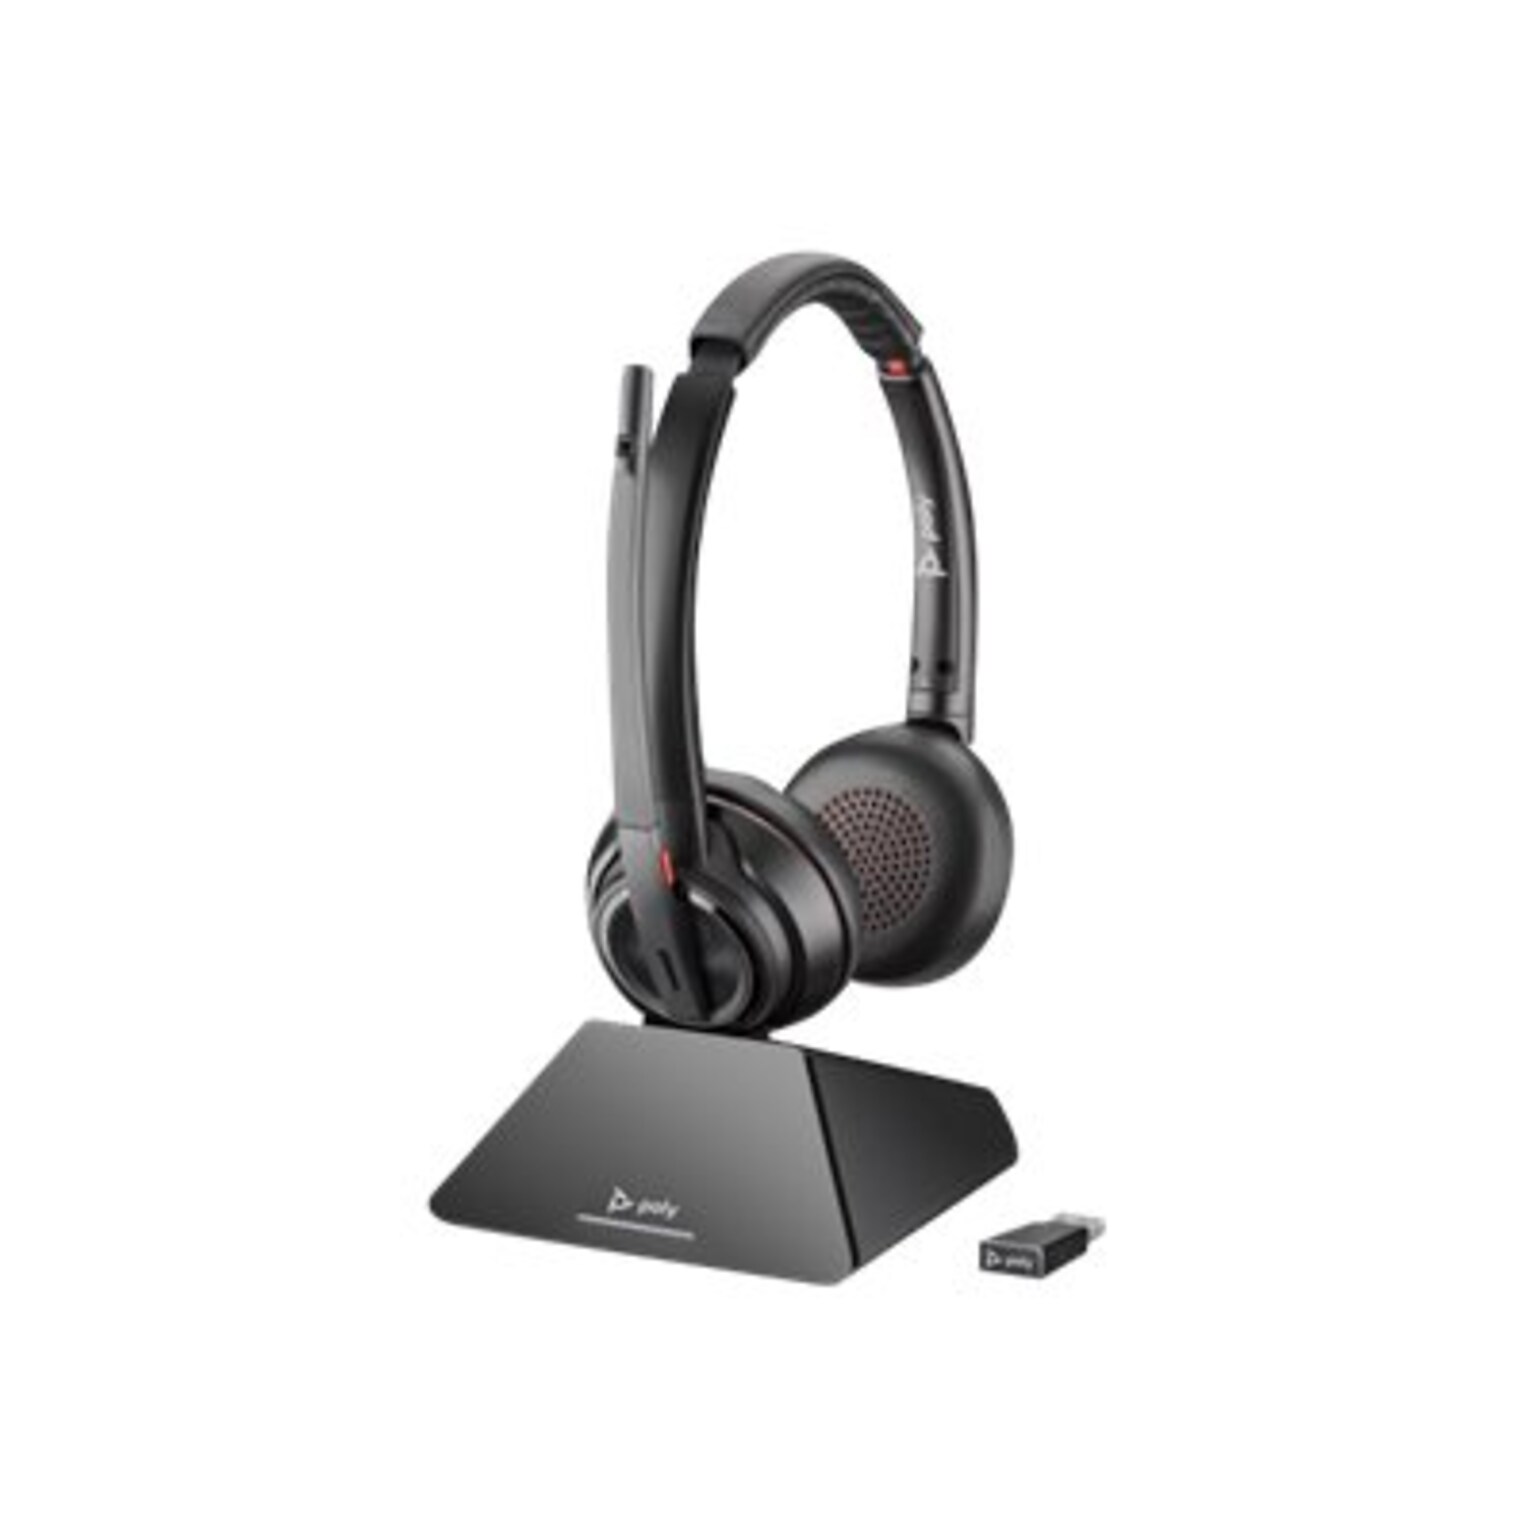 Poly Savi 8220 UC Wireless Noise Canceling Stereo Headset, Over-the-Head, Black (209214-01)